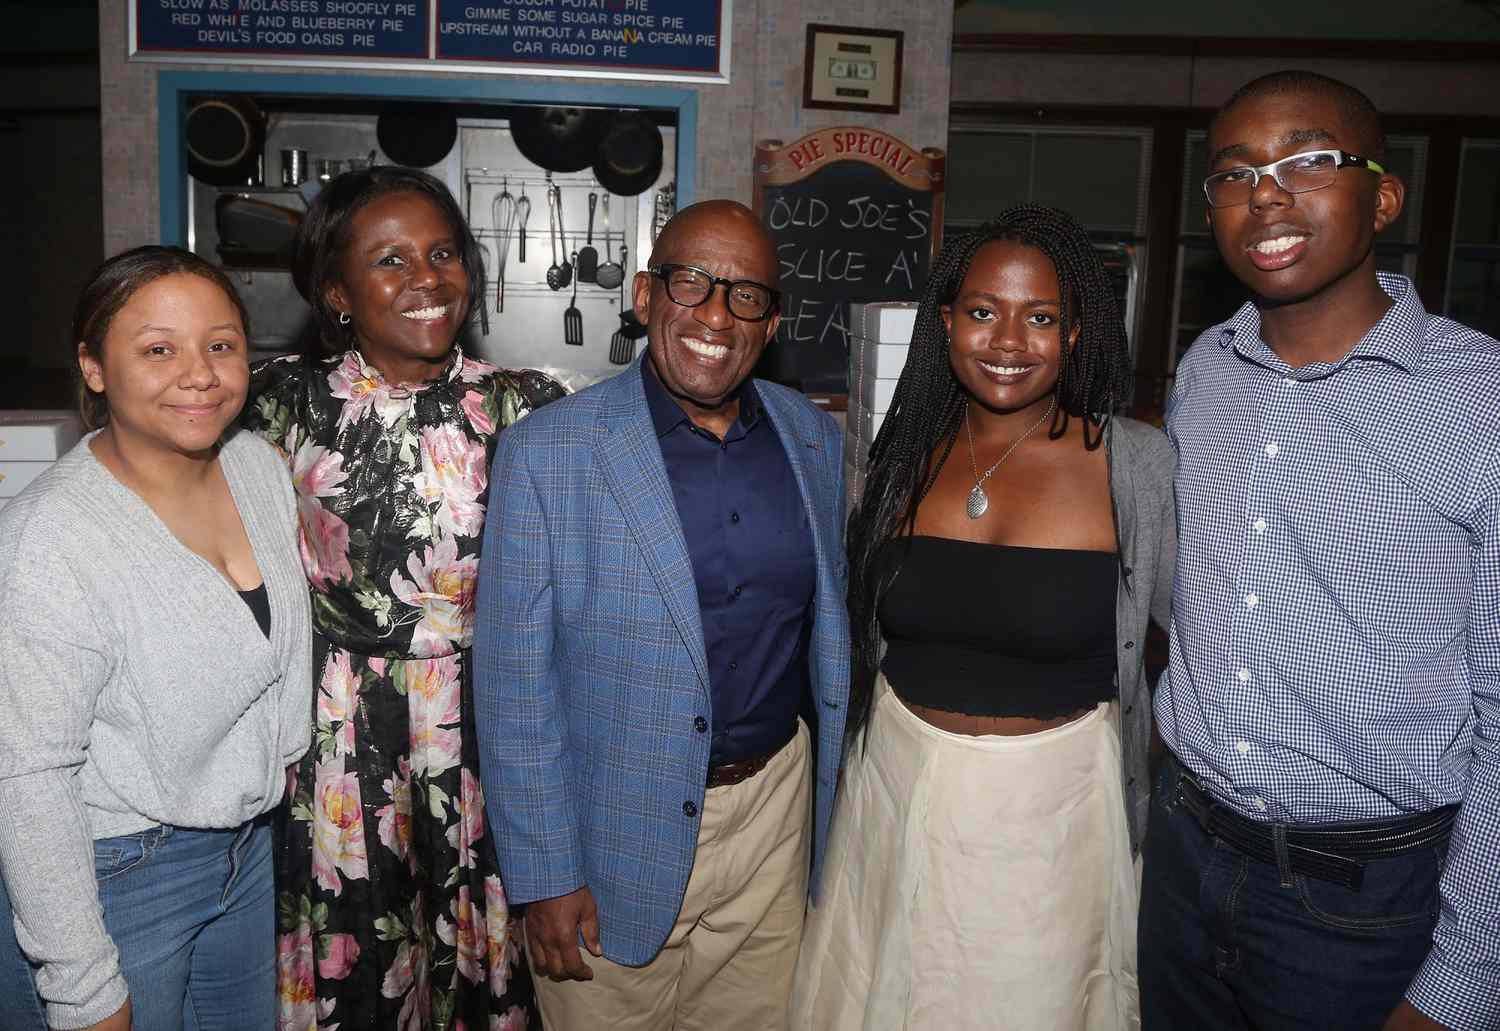 An image of Al Roker and Deborah Roberts with their family.